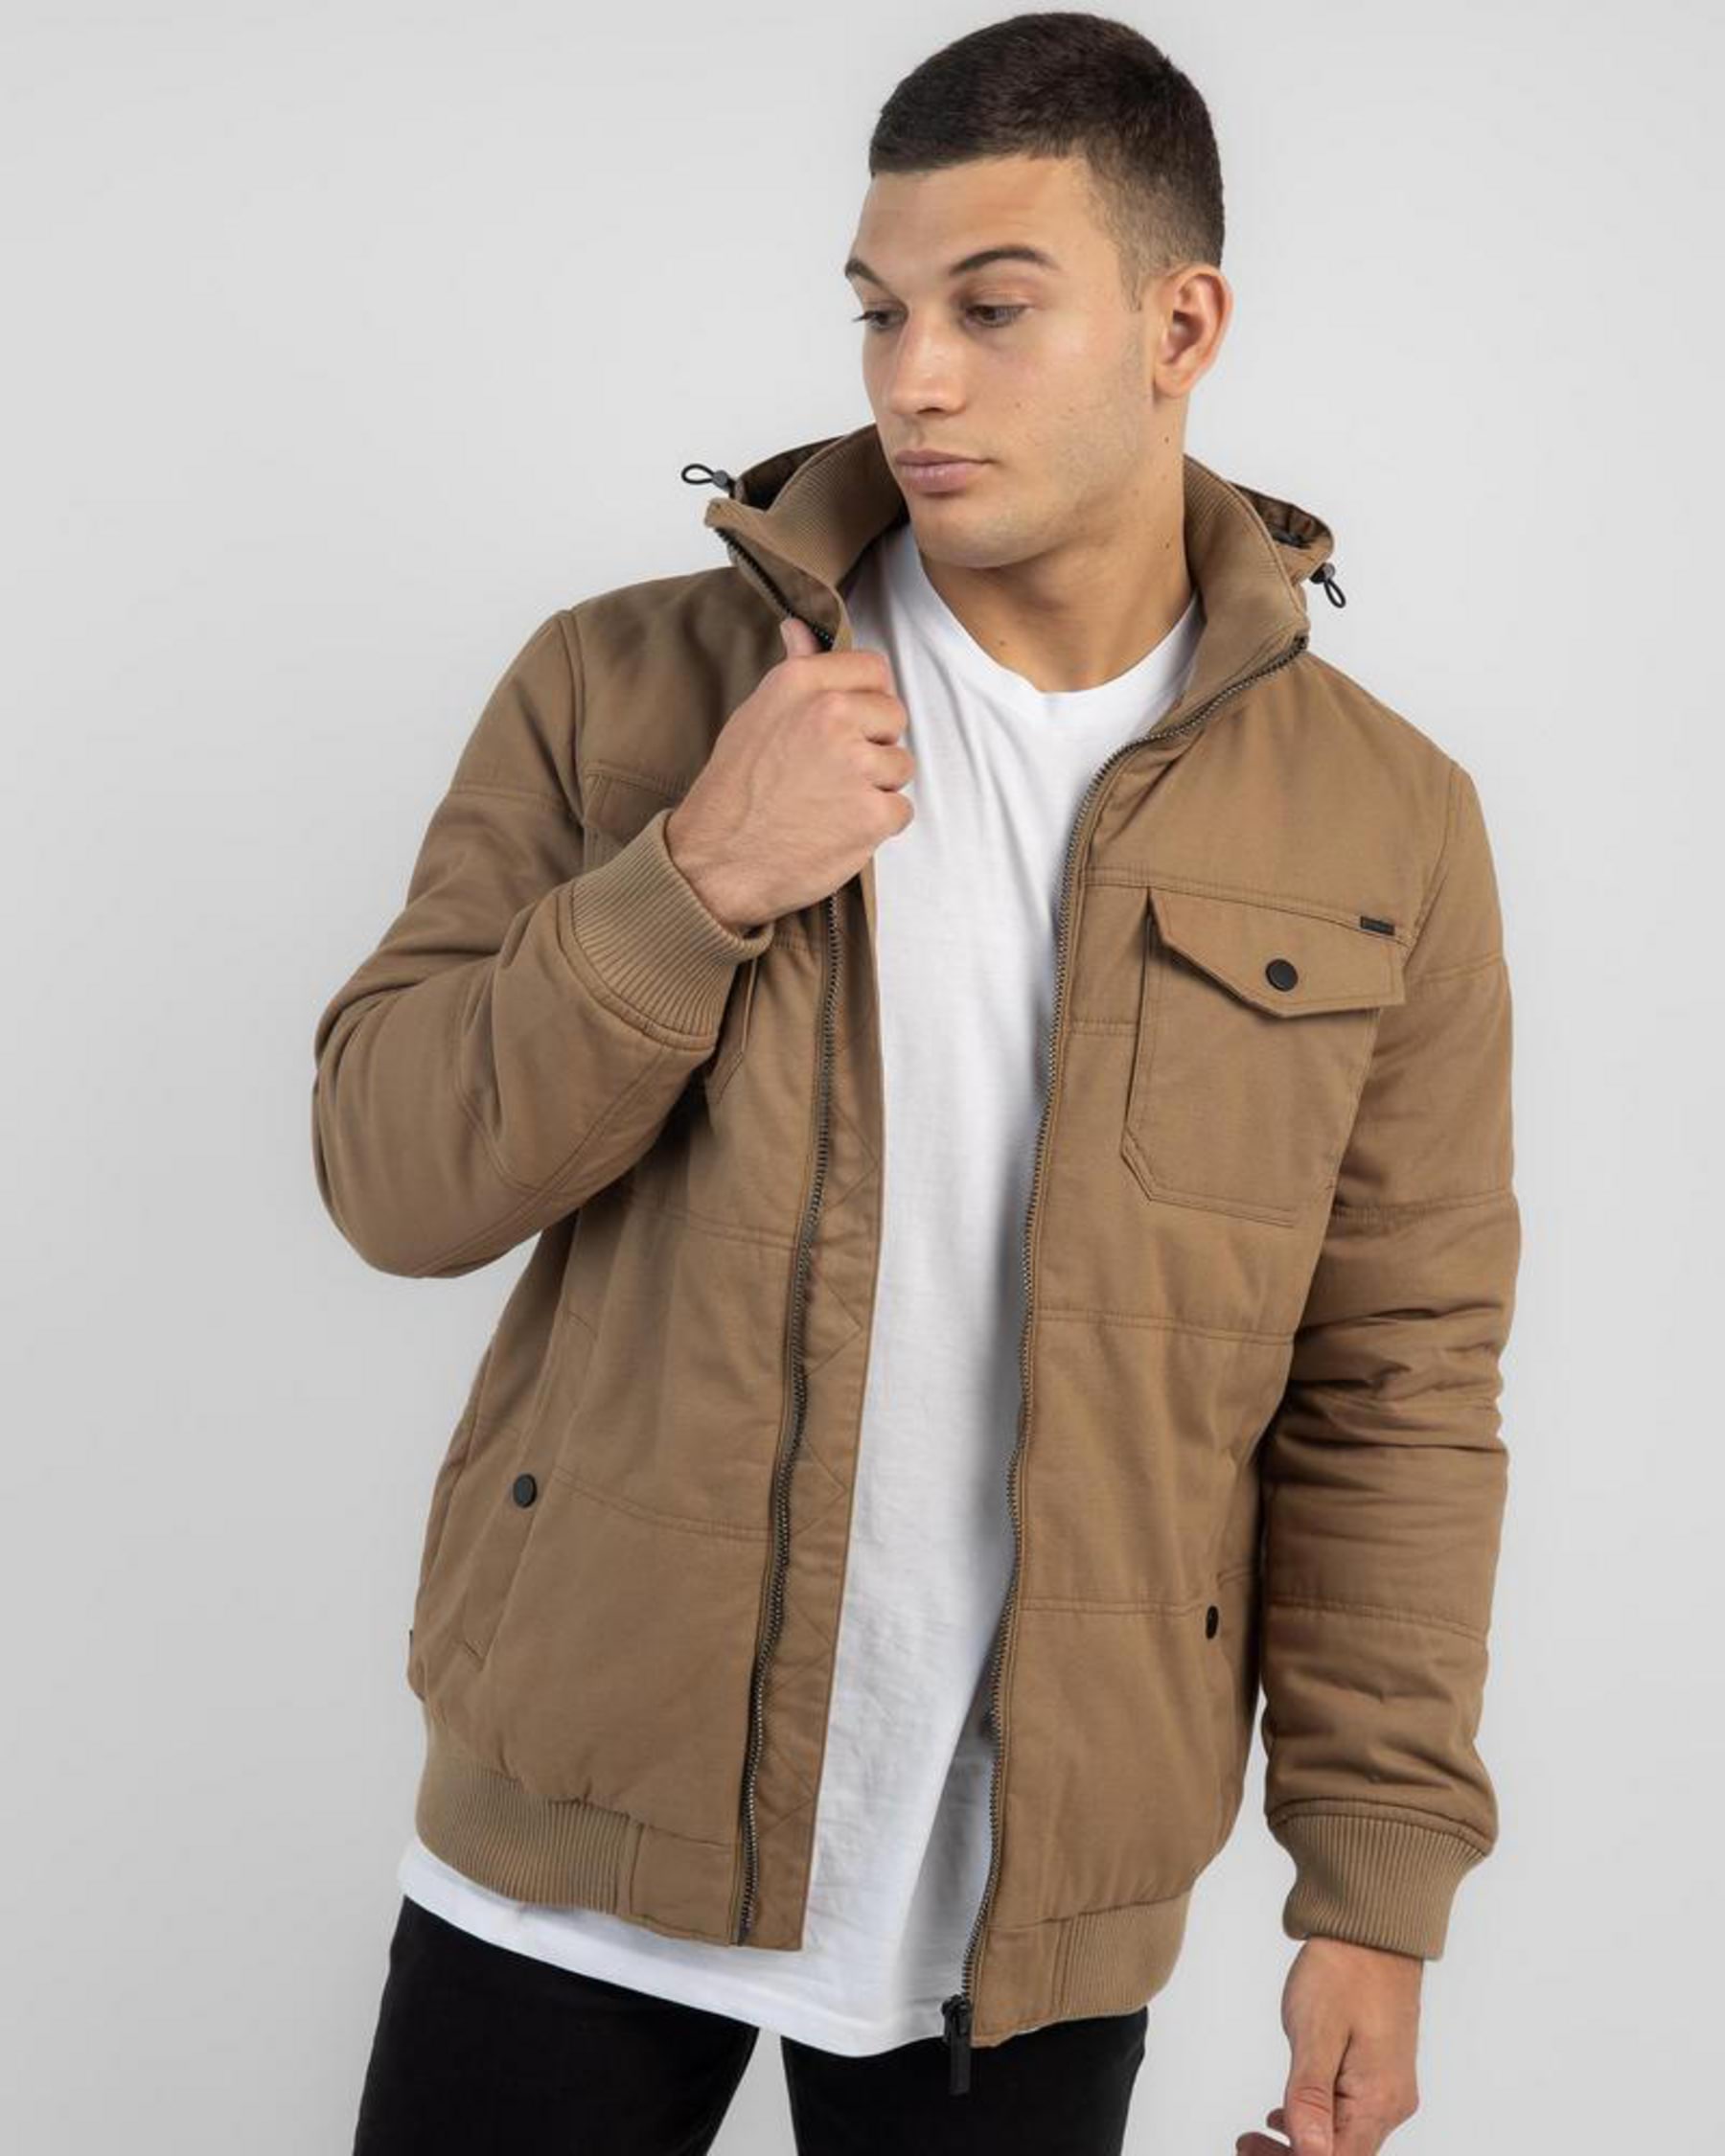 Dexter Acquisition Hooded Jacket In Tan - Fast Shipping & Easy Returns ...